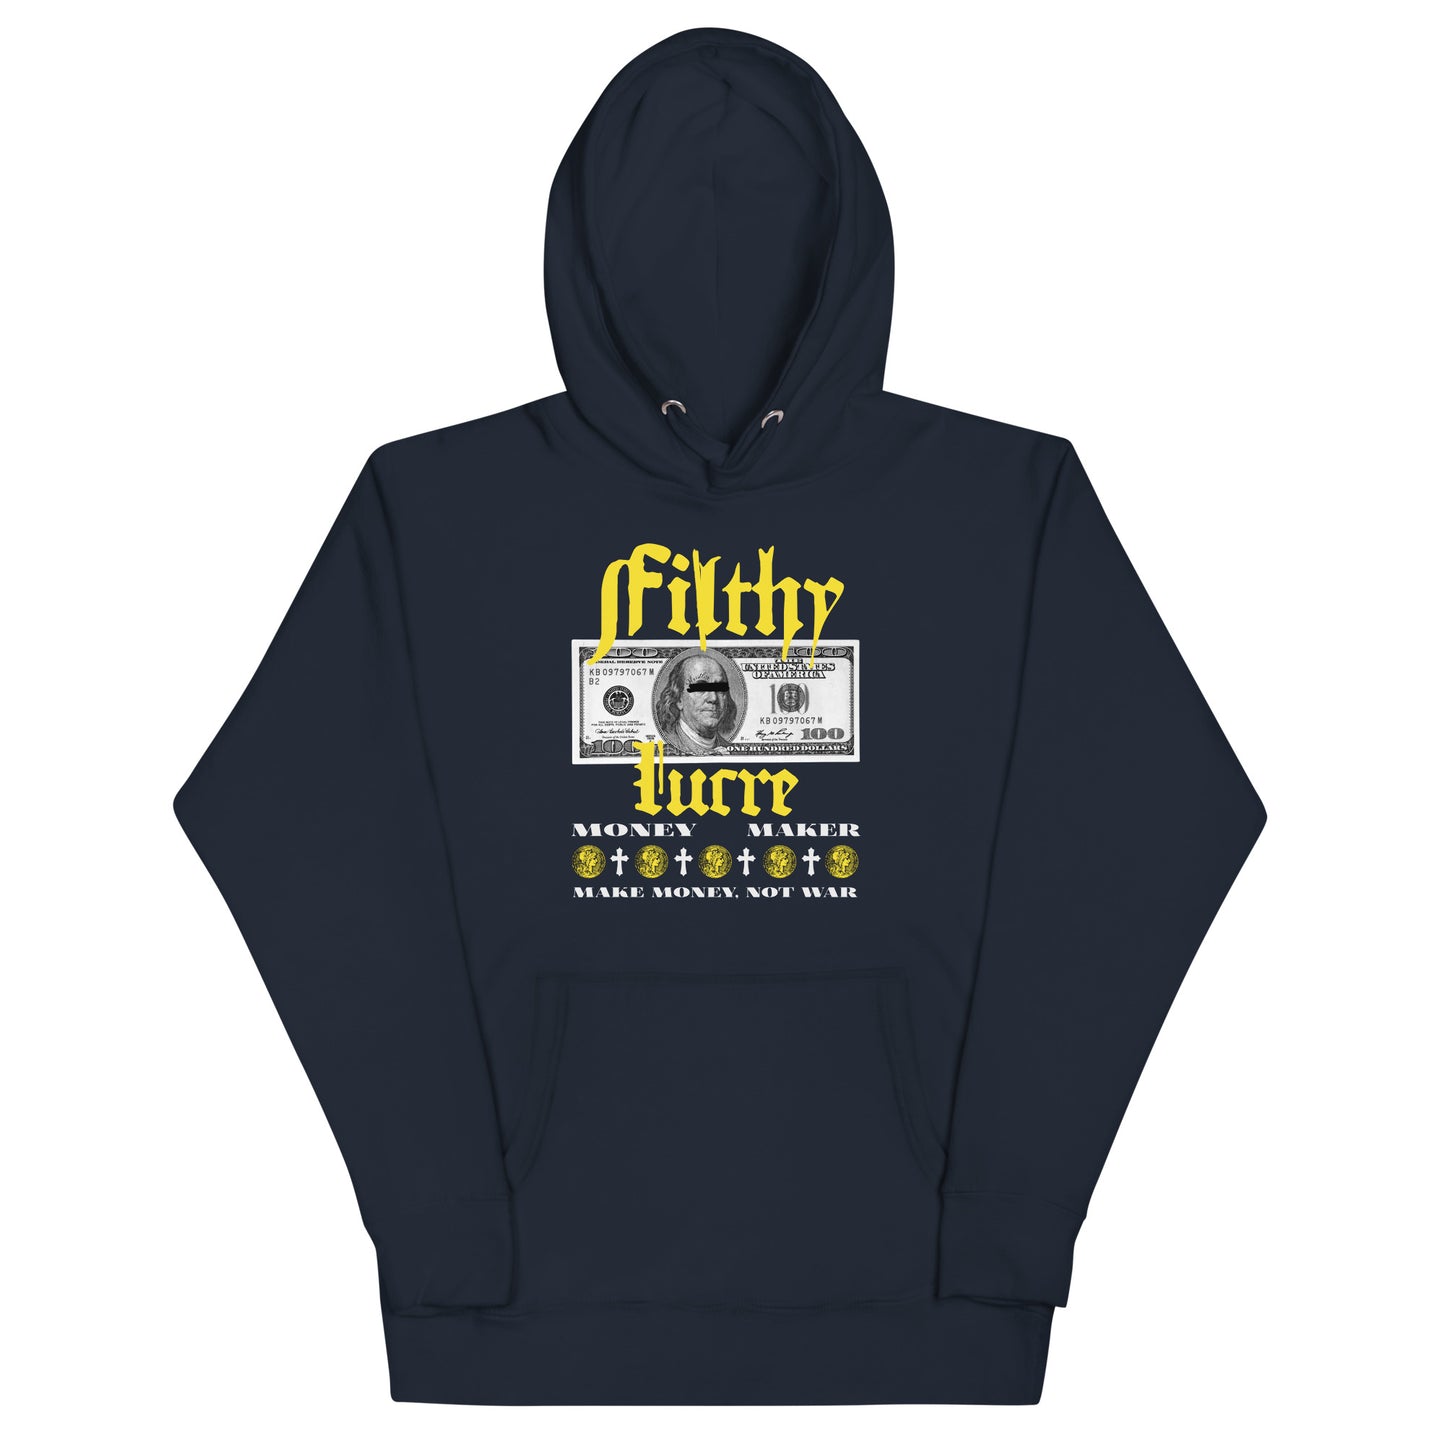 Filthy Lucre Unisex Hoodie - GFTD MNDS